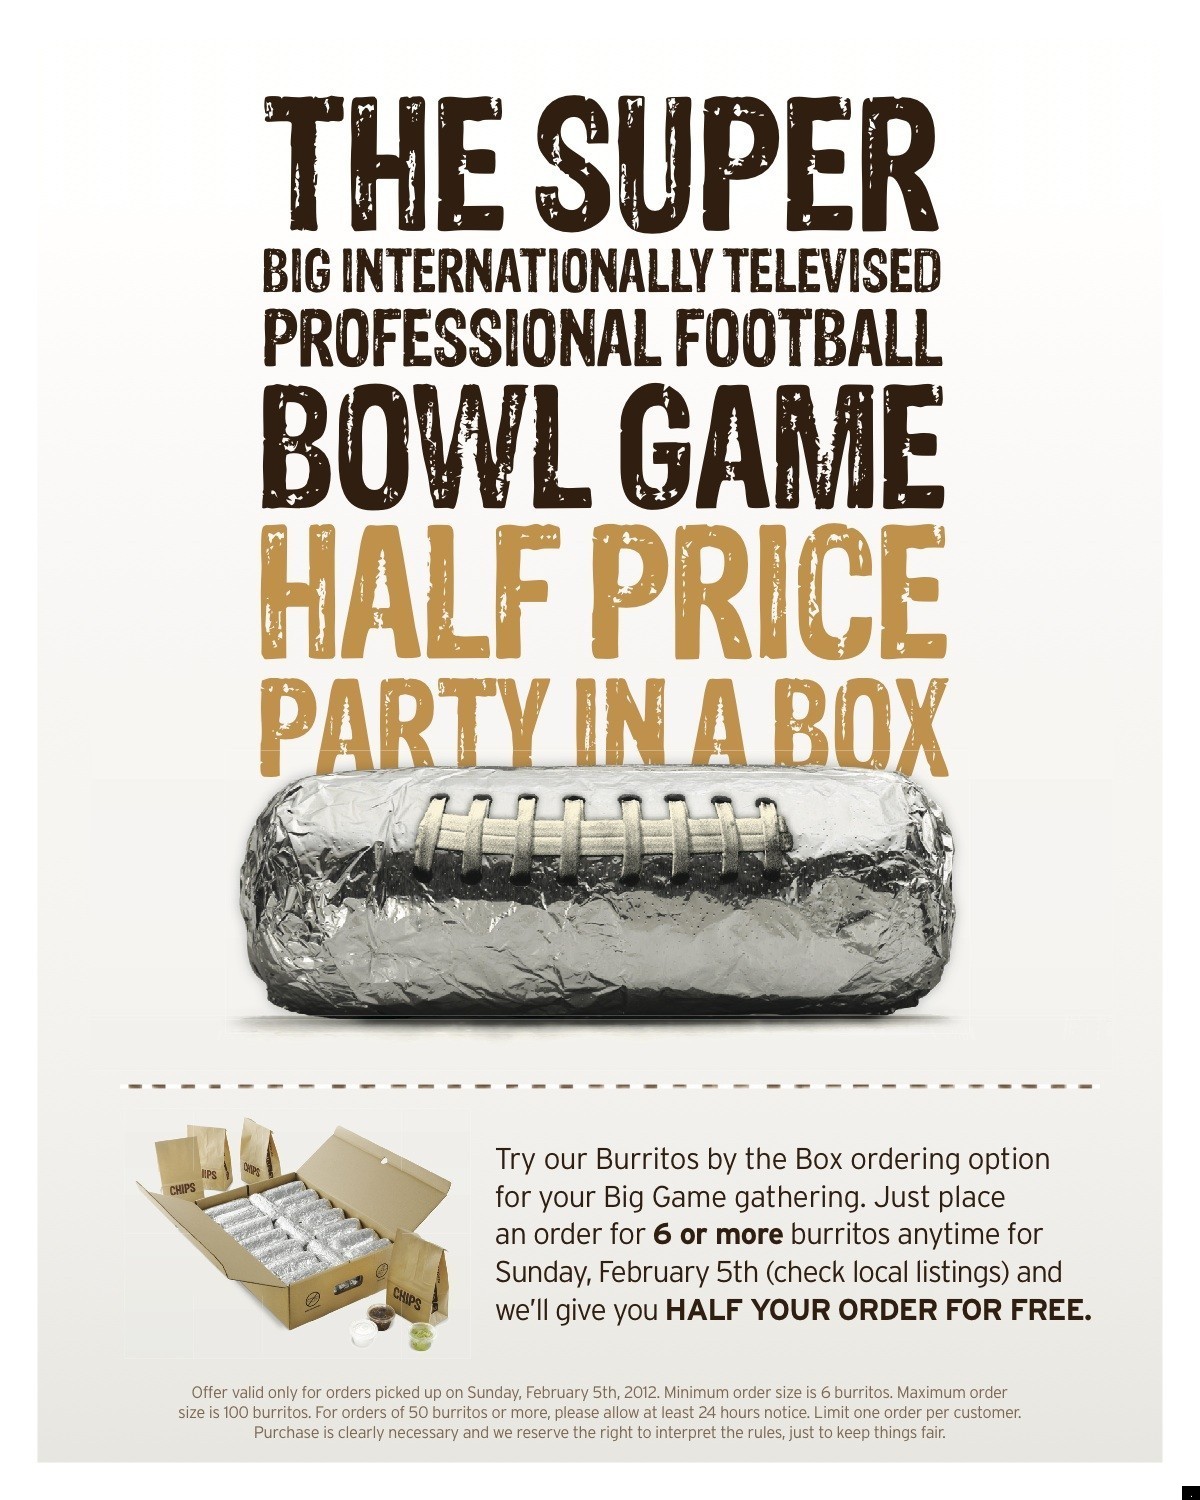 Chipotle Super Bowl Promotion Will Give Football Fans Half Off Burritos